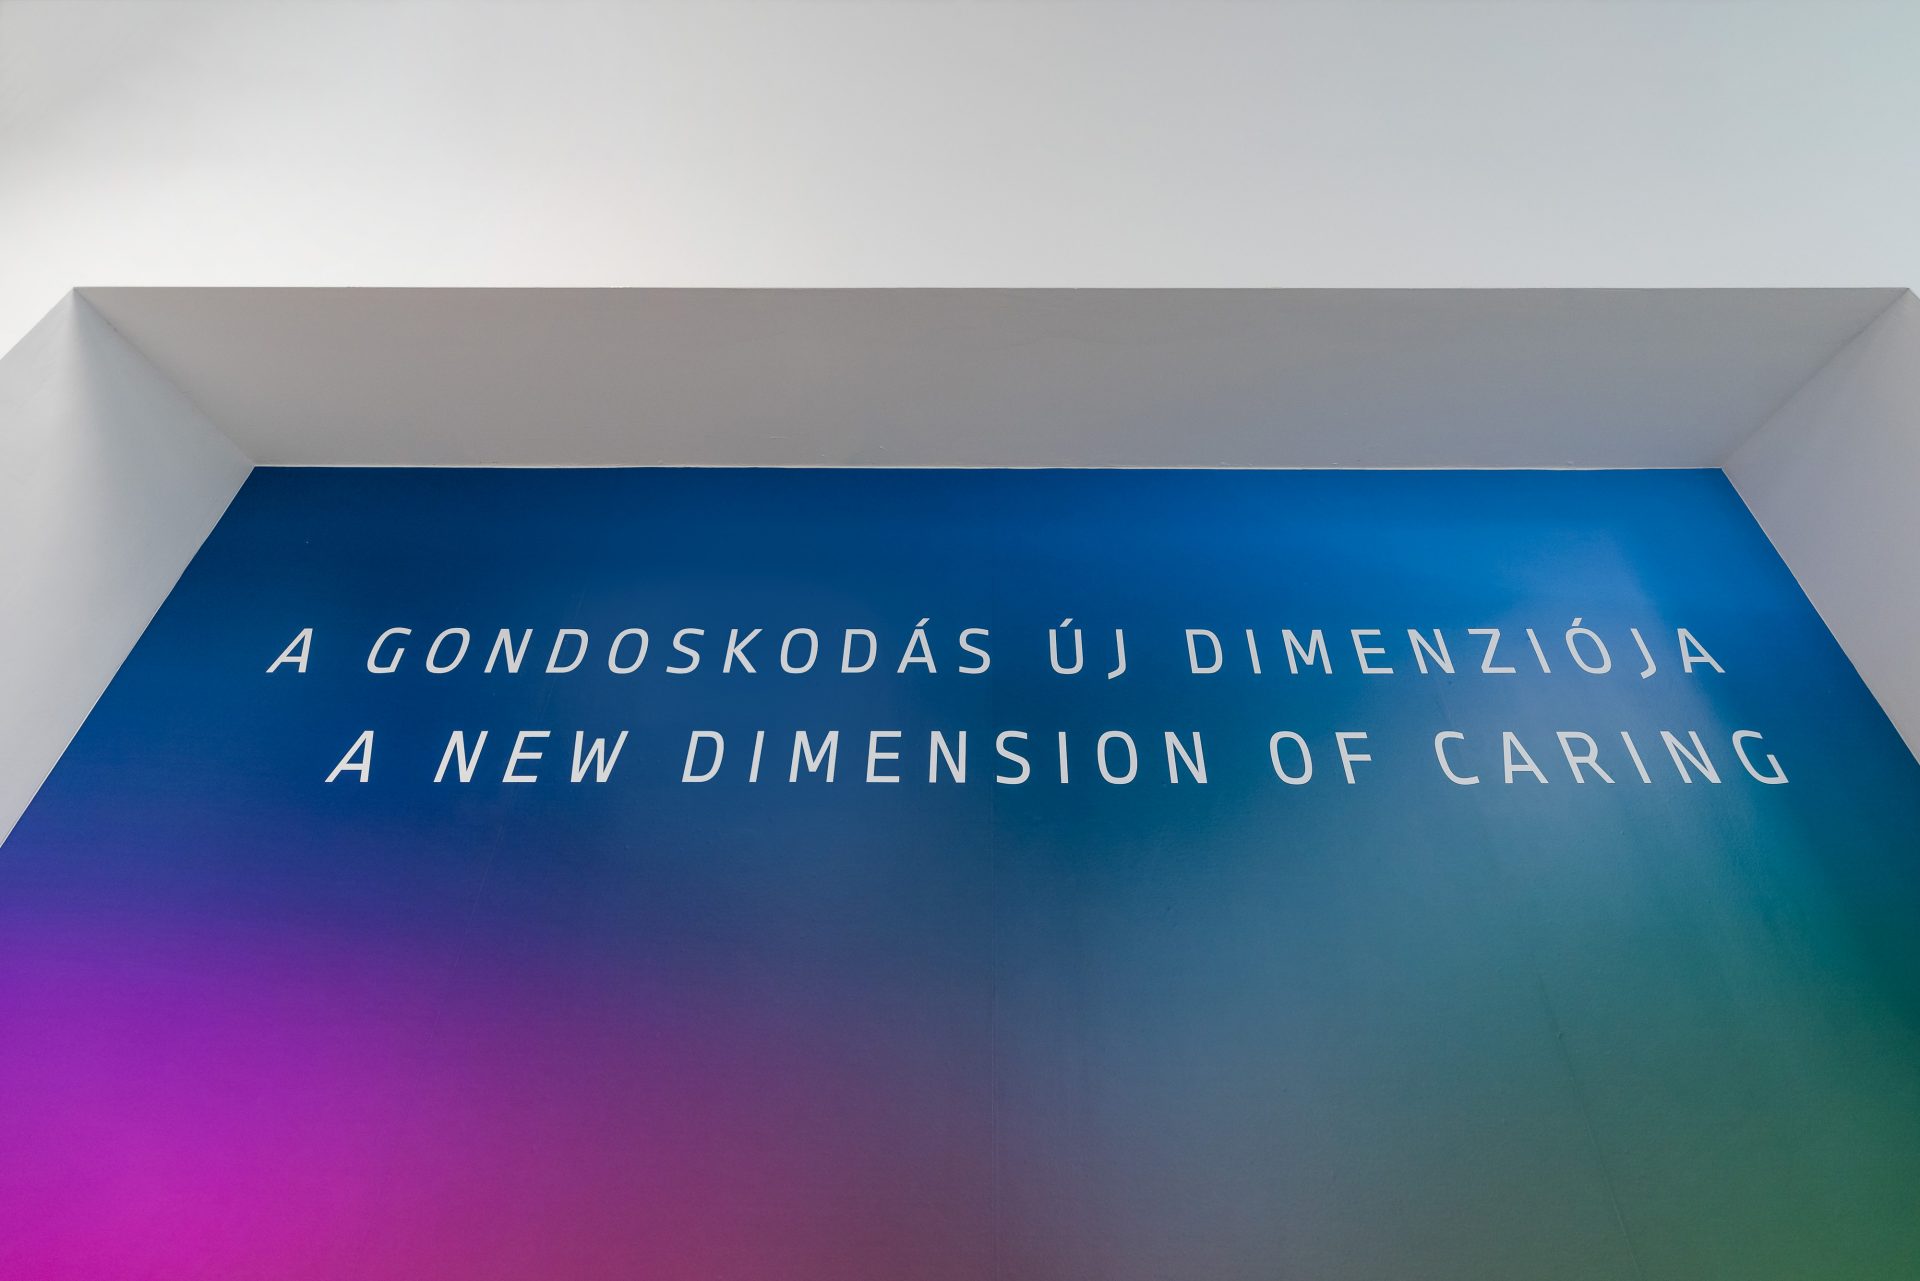 "A new dimension of caring" is written on the wall